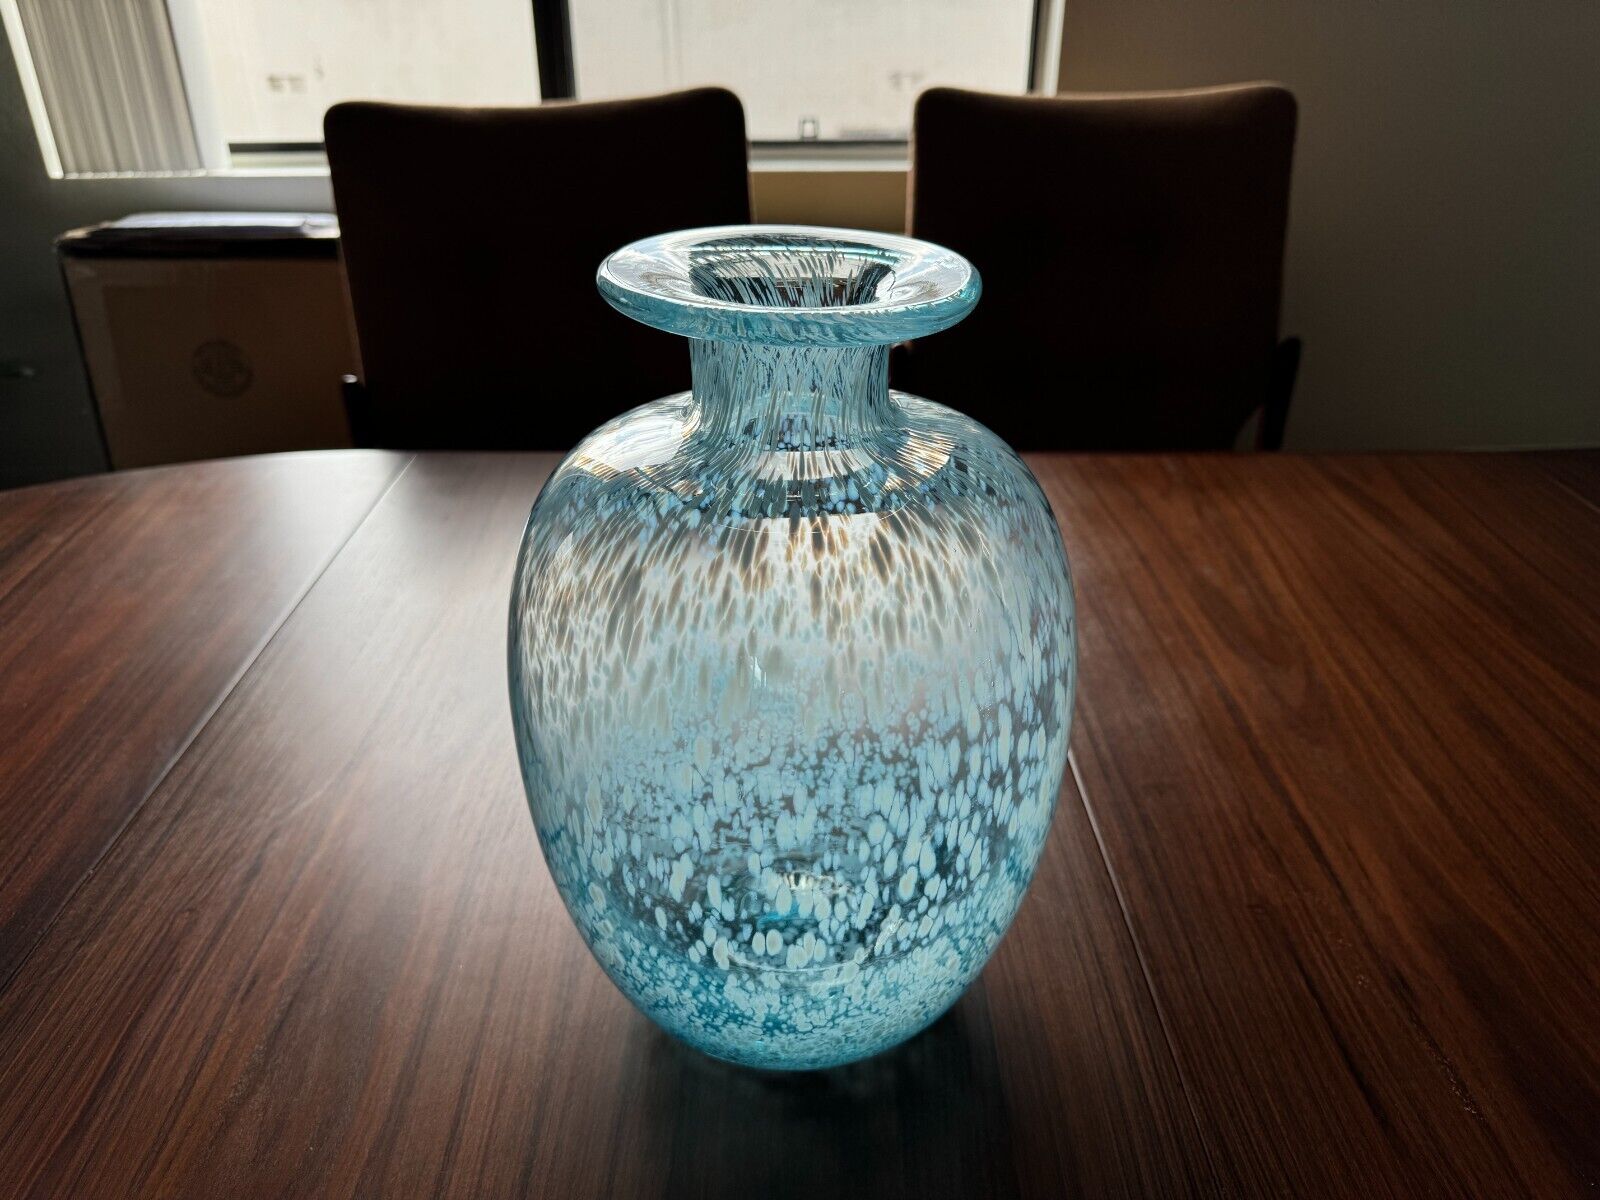 Magnor Mid Century Modern Blue Vase - Made in Norway - Beautiful Norweigan Glass